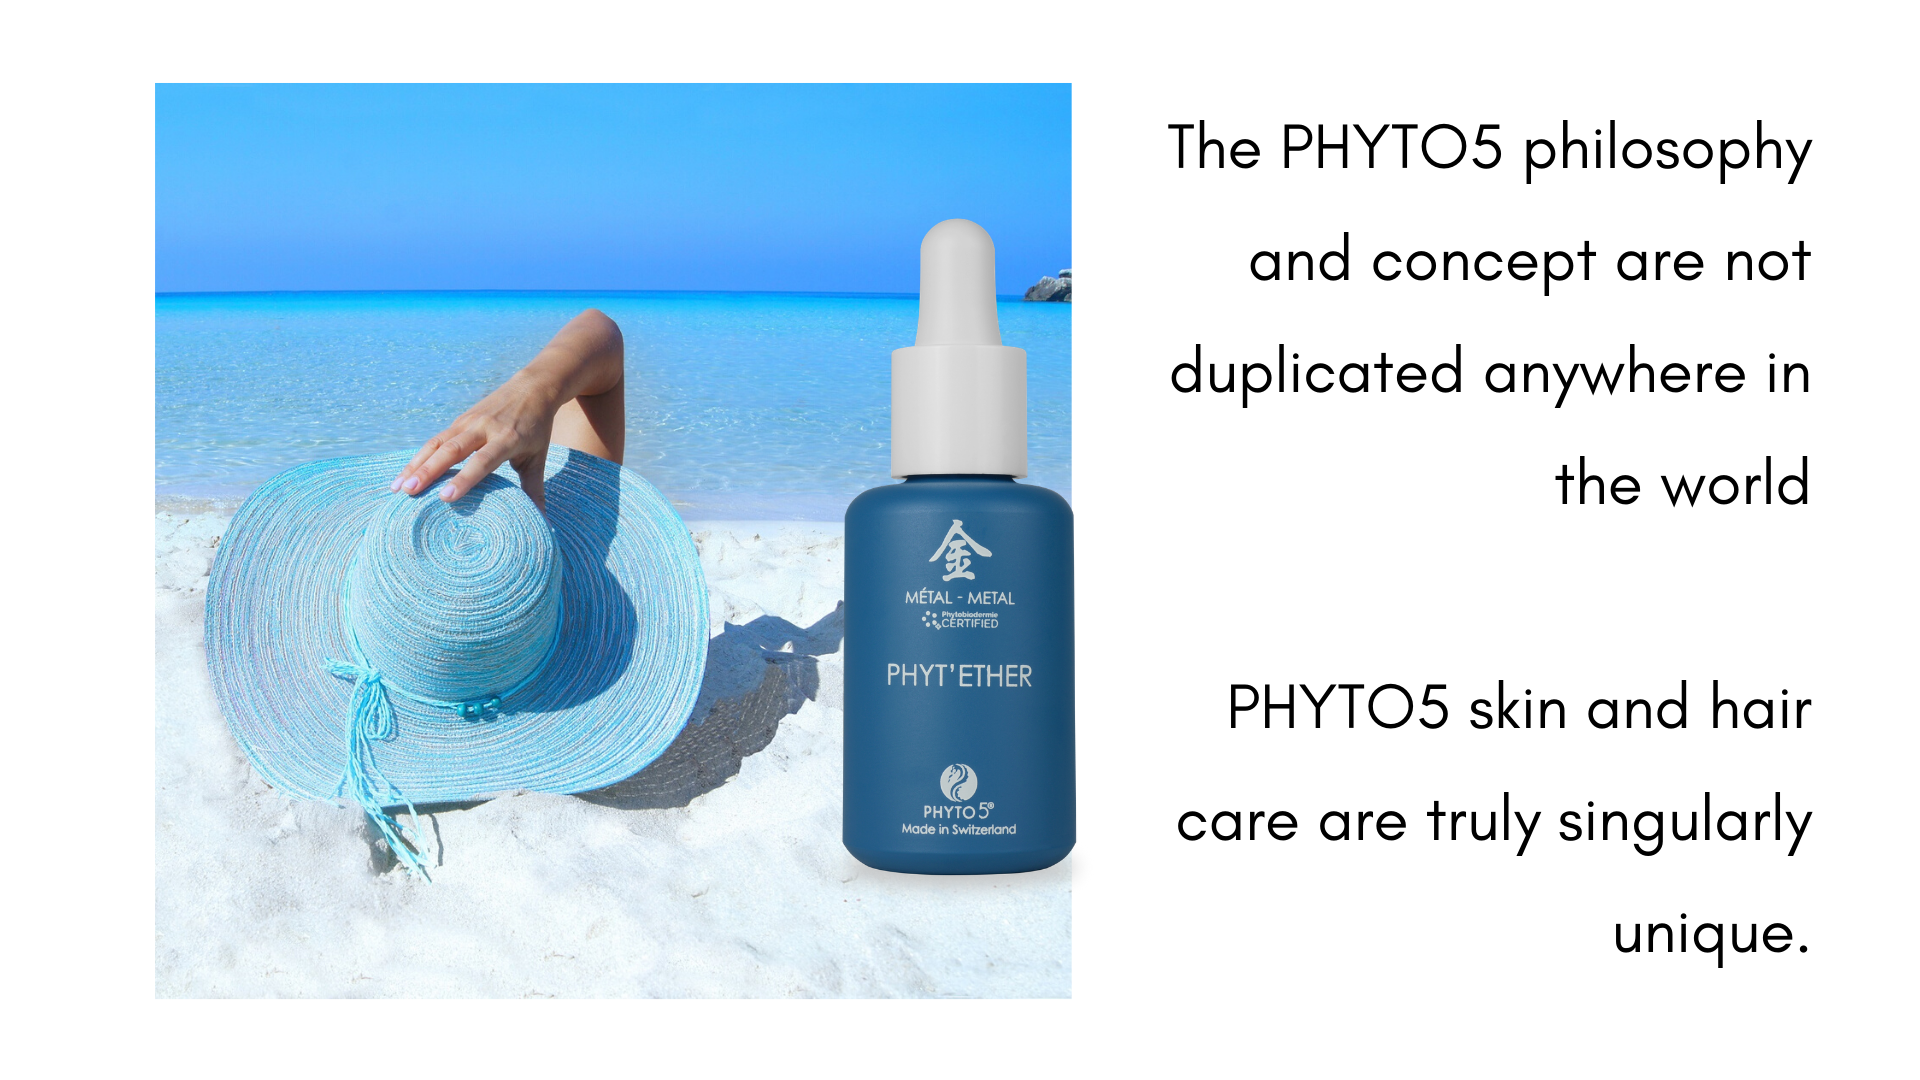 phyto5-philosophy-and-concept-in-skincare.png